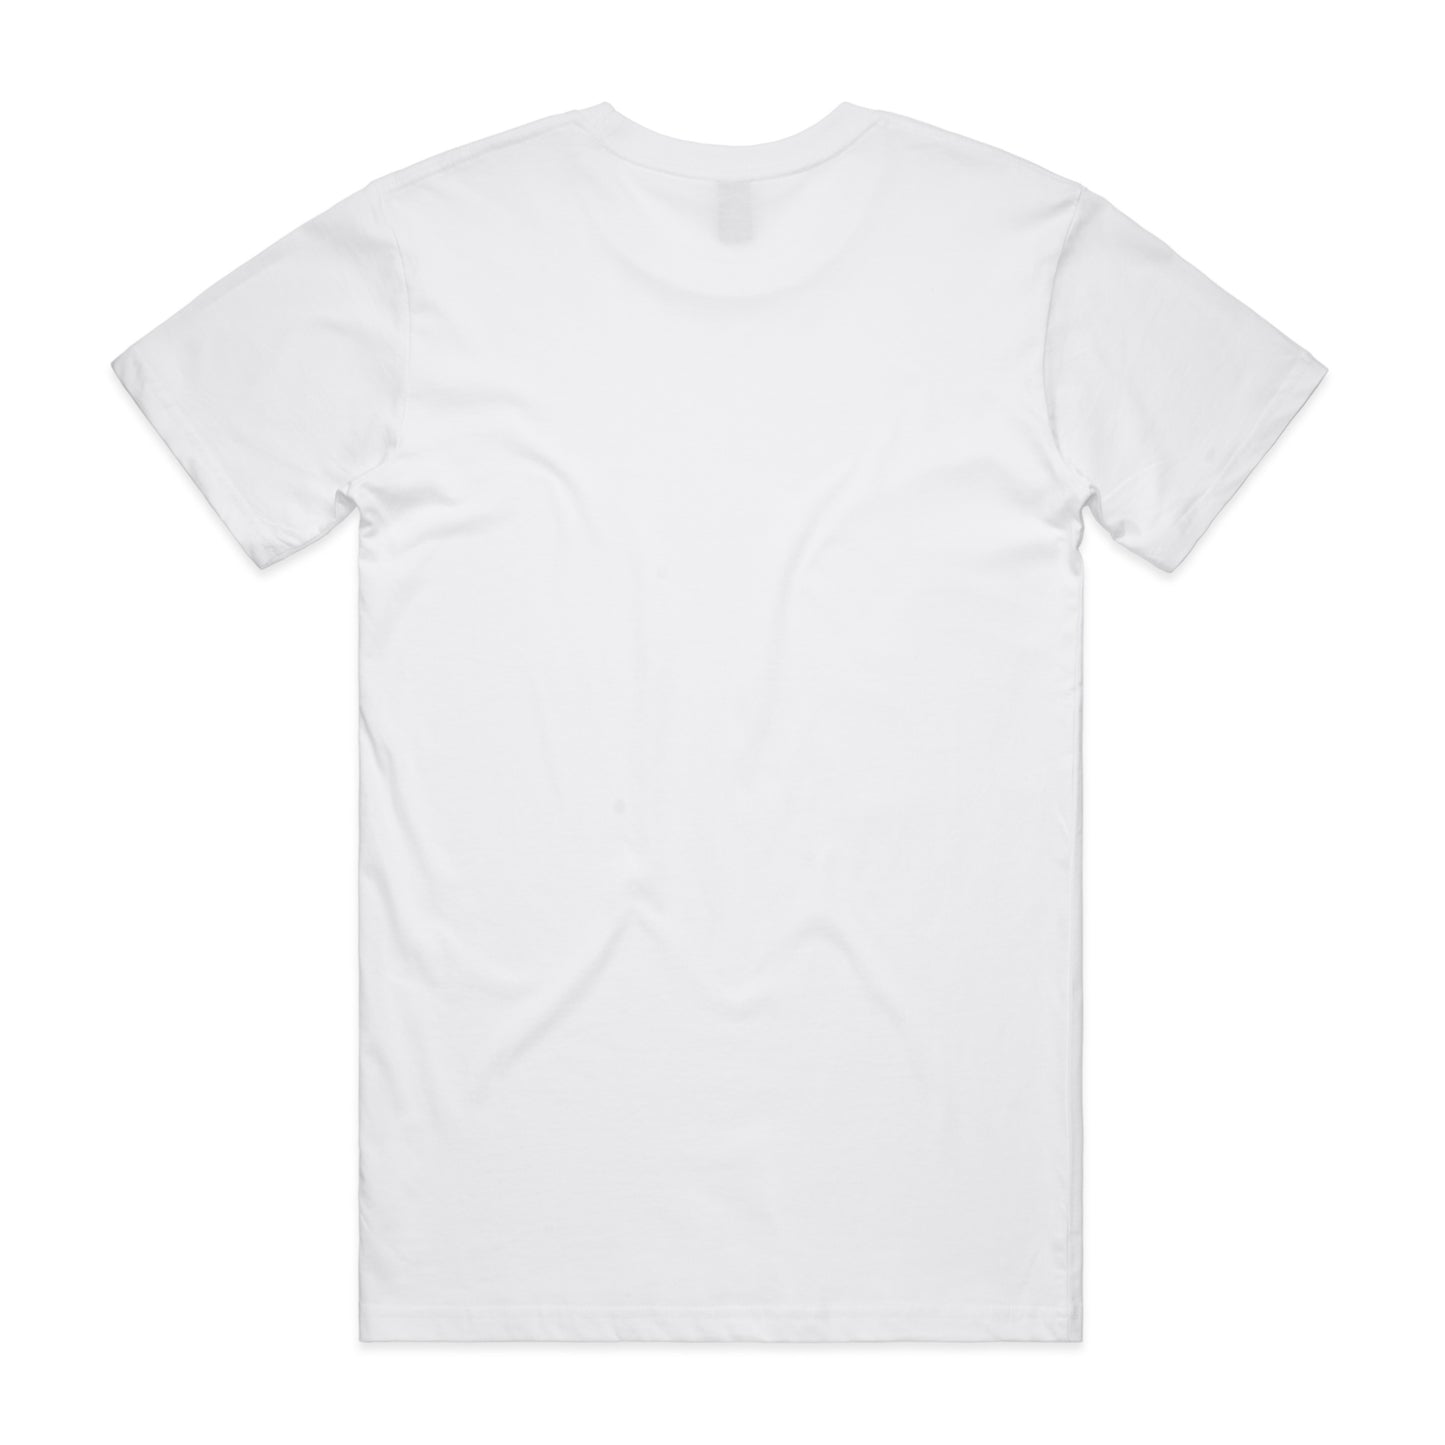 Forever TSPOON - recycled fabric tee - white